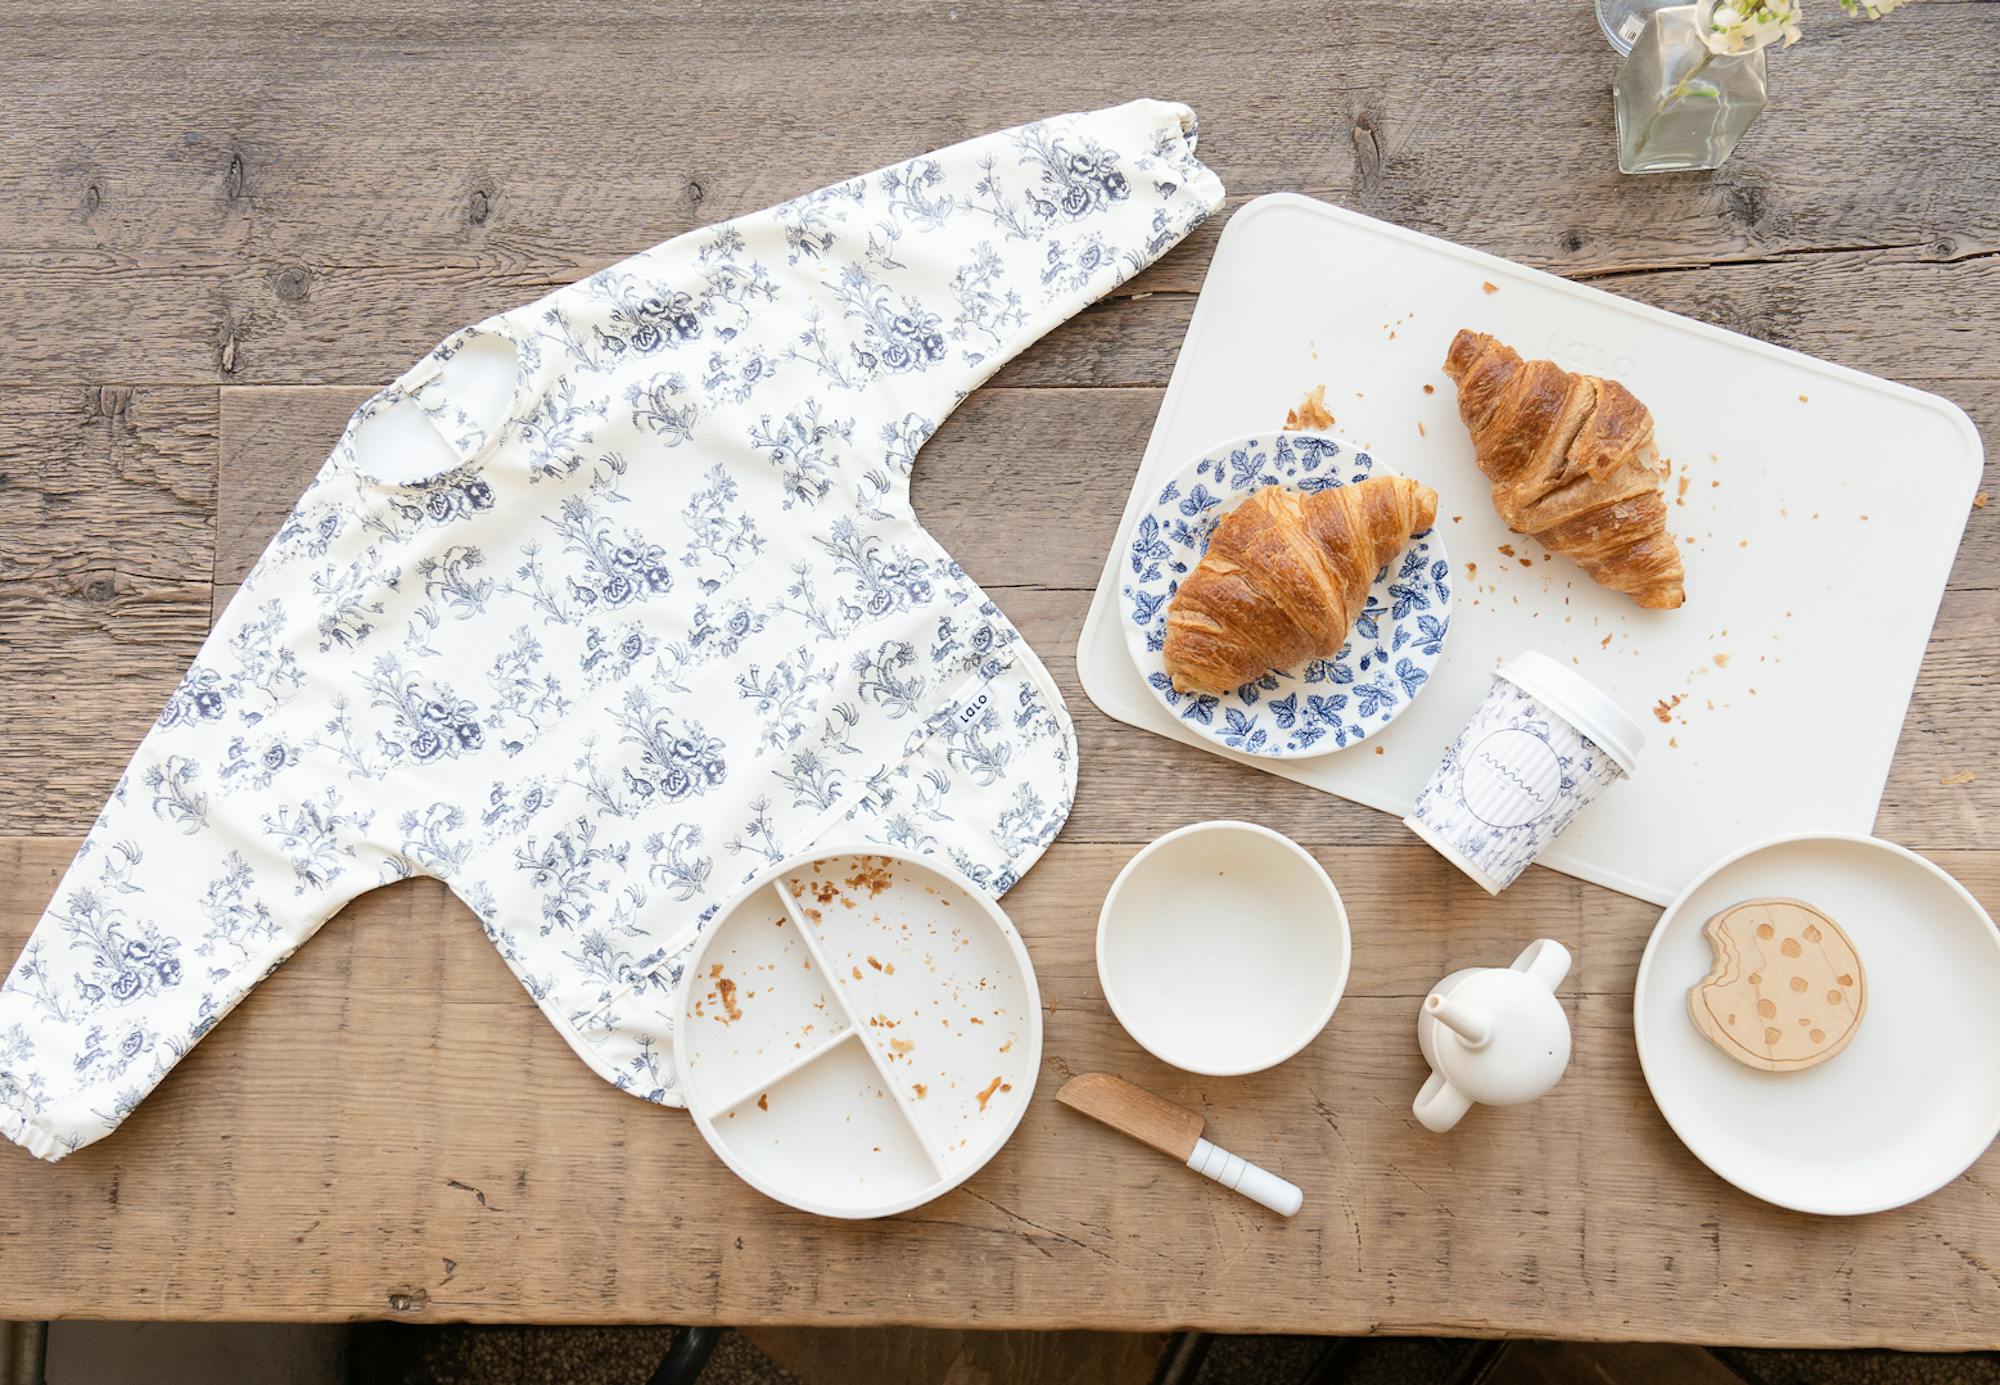 flat lay of lalo bib, croissants, and lalo accessories